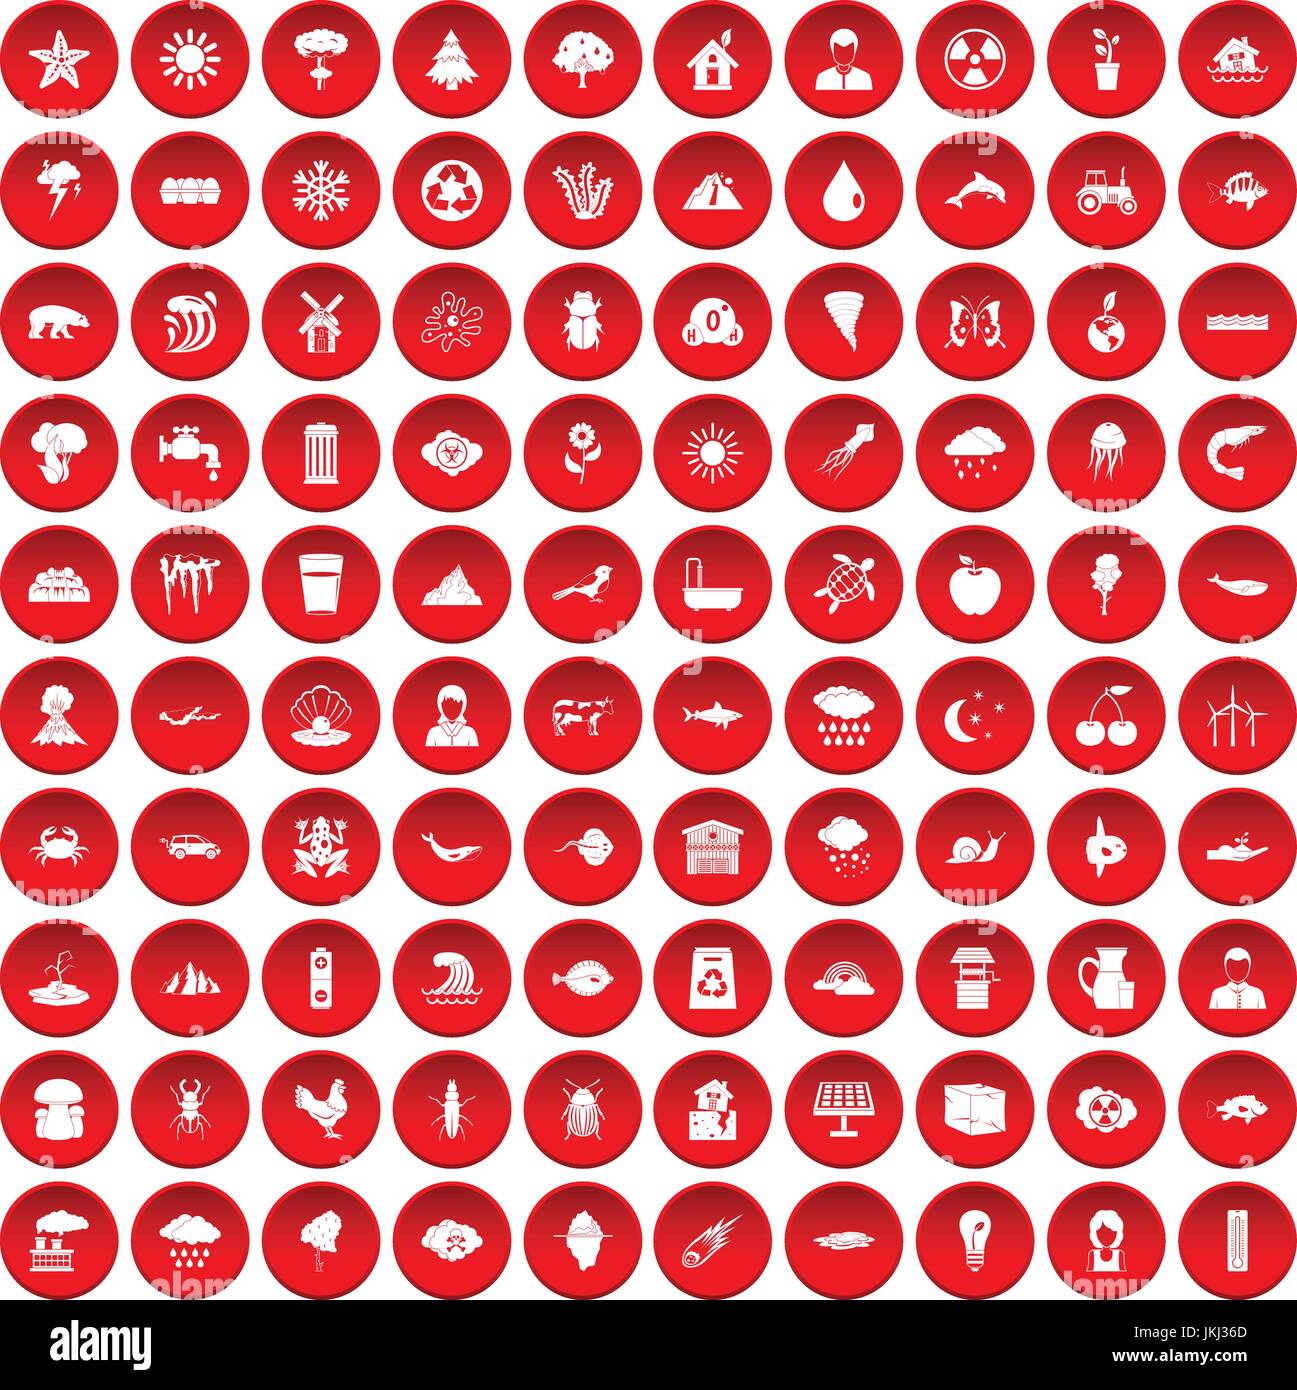 100 earth icons set red Stock Vector